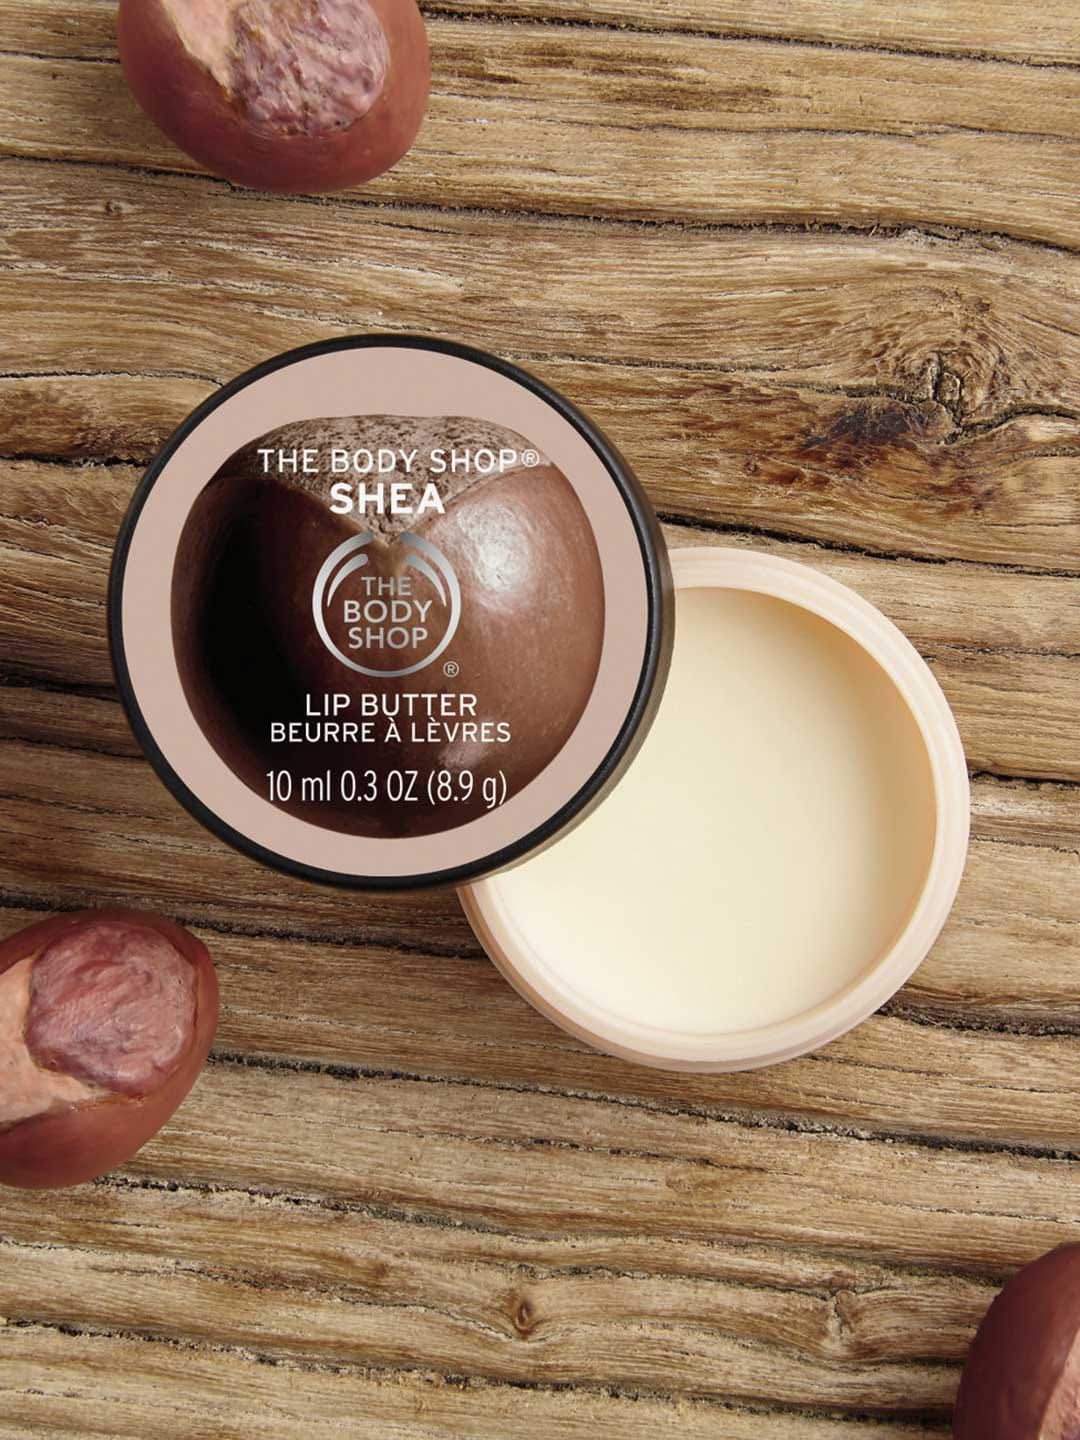 THE BODY SHOP Shea Lip Butter 10 ml Price in India